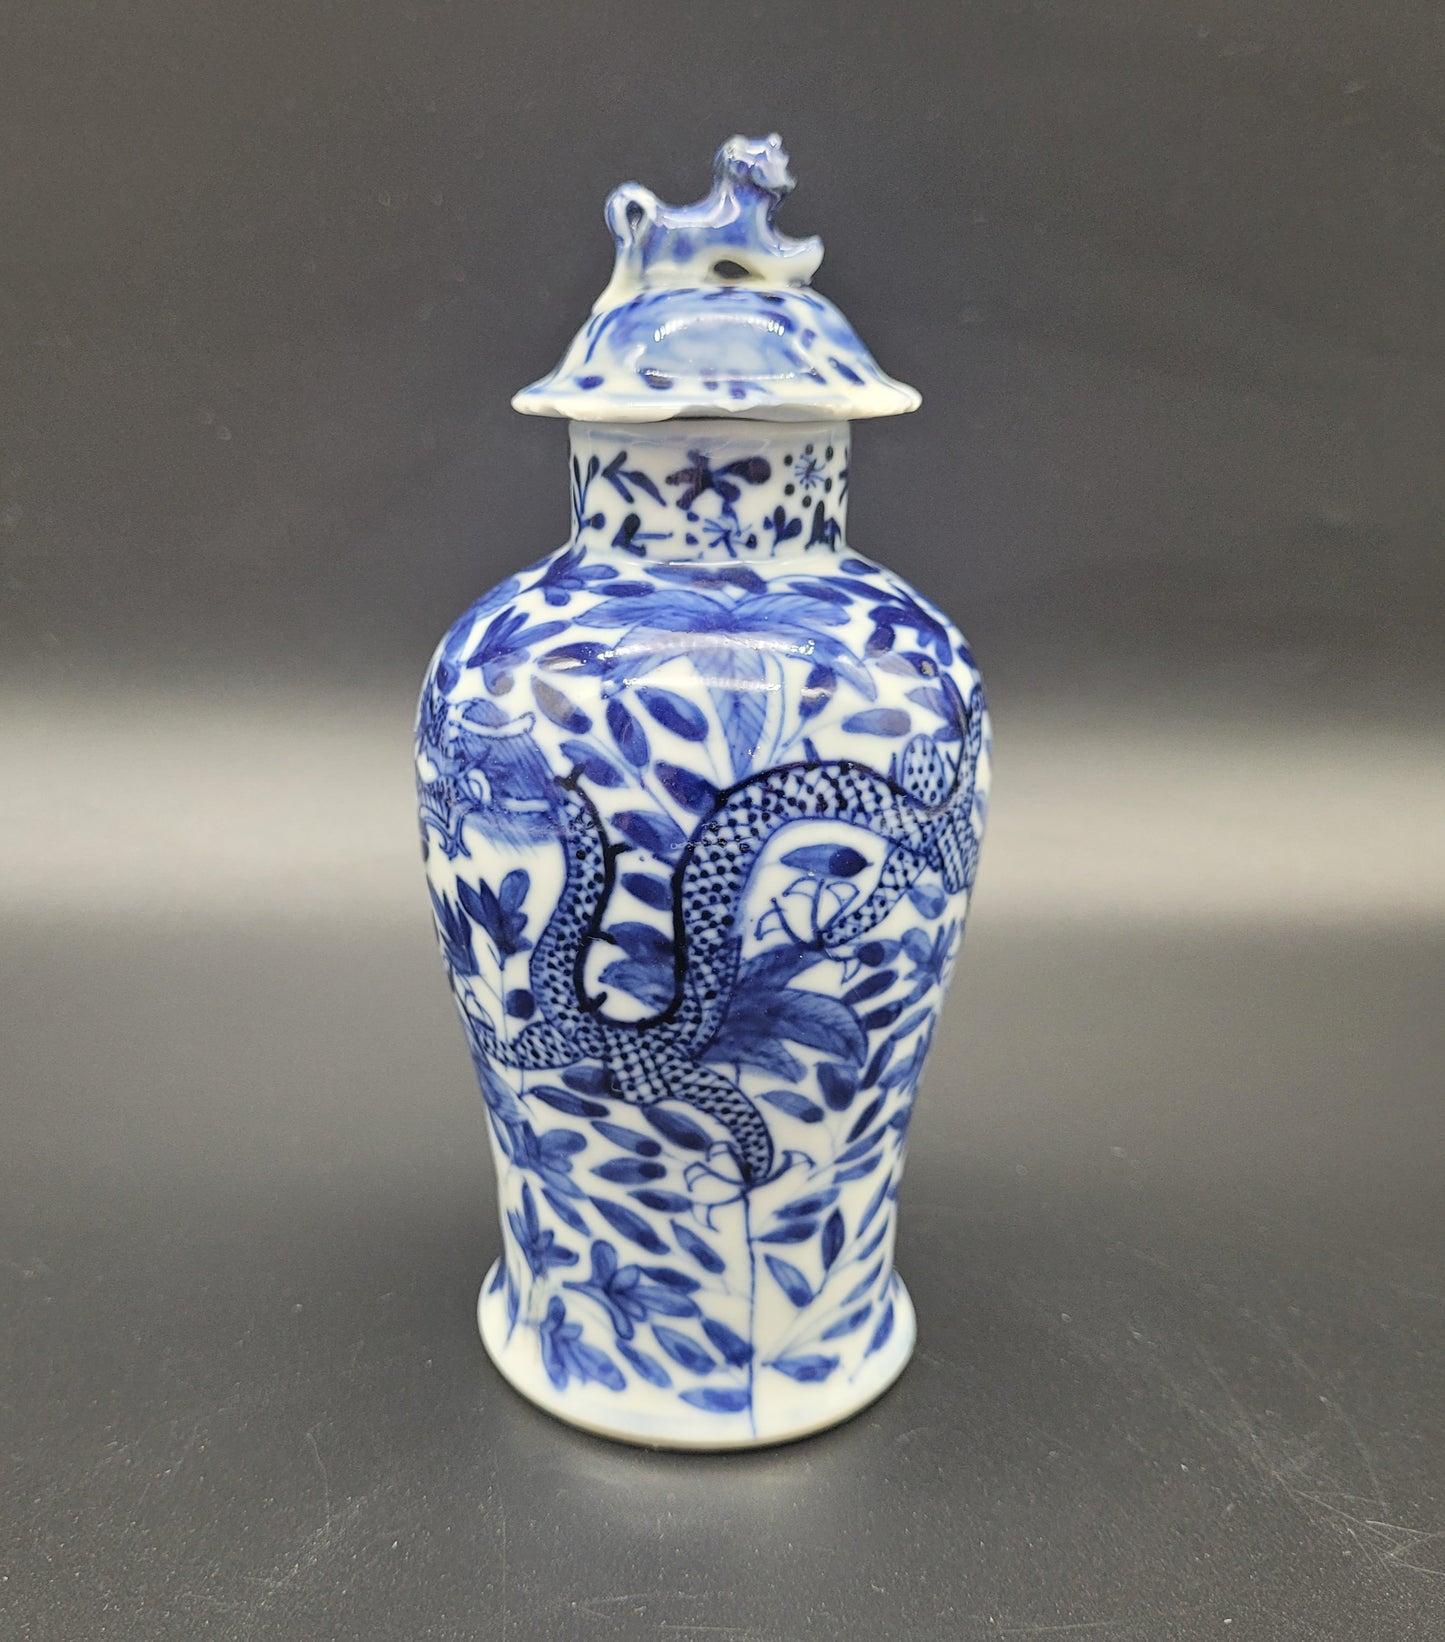 Antique Chinese Dragon Vase 19th Century 4 Character Mark